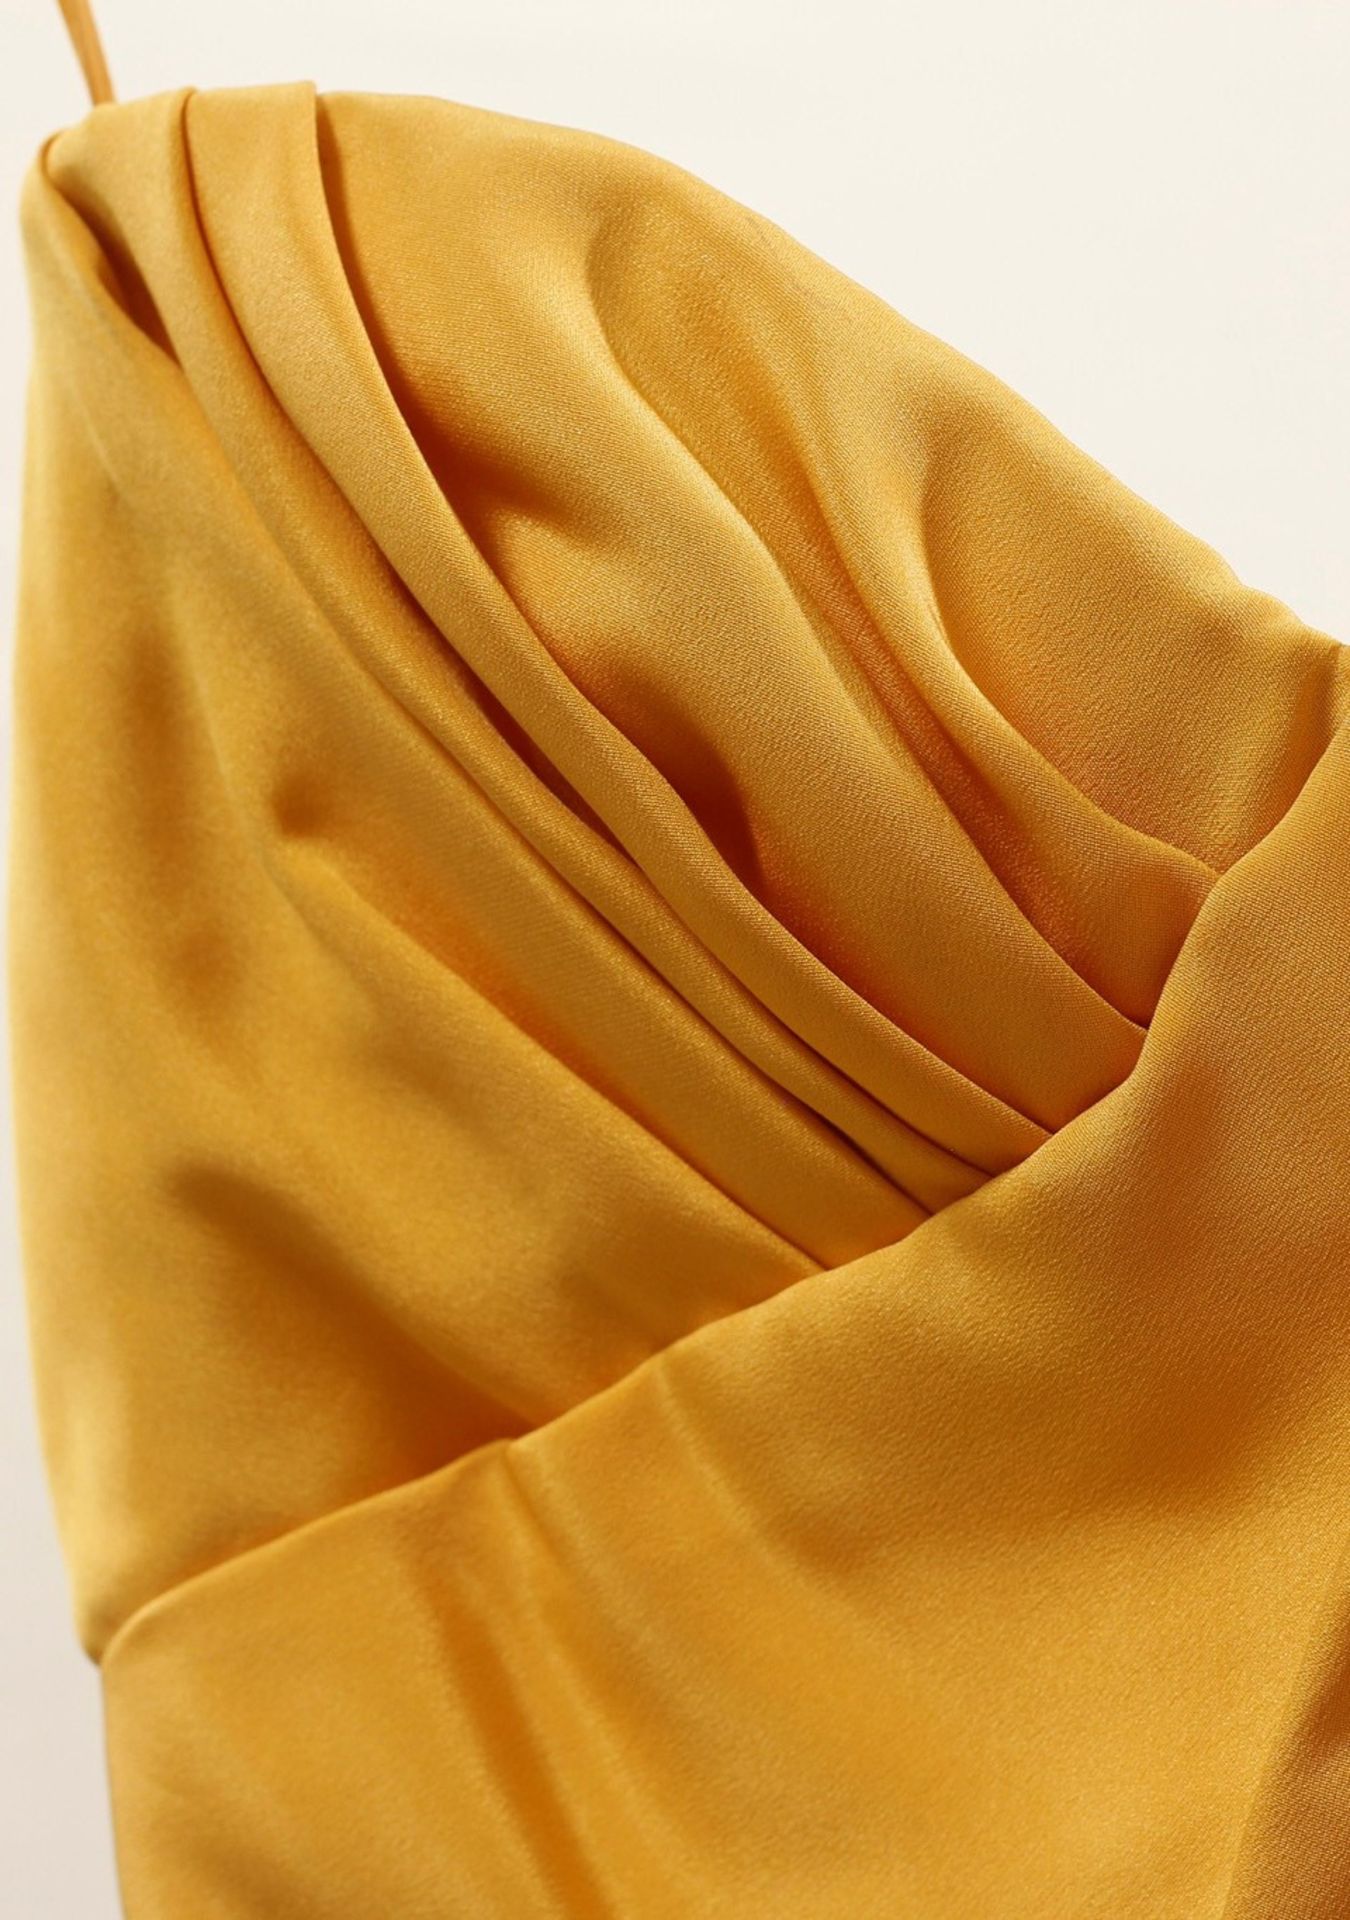 1 x Boutique Le Duc Yellow Dress - Size: 8 - Material: 100% Silk - From a High End Clothing Boutique - Image 5 of 7